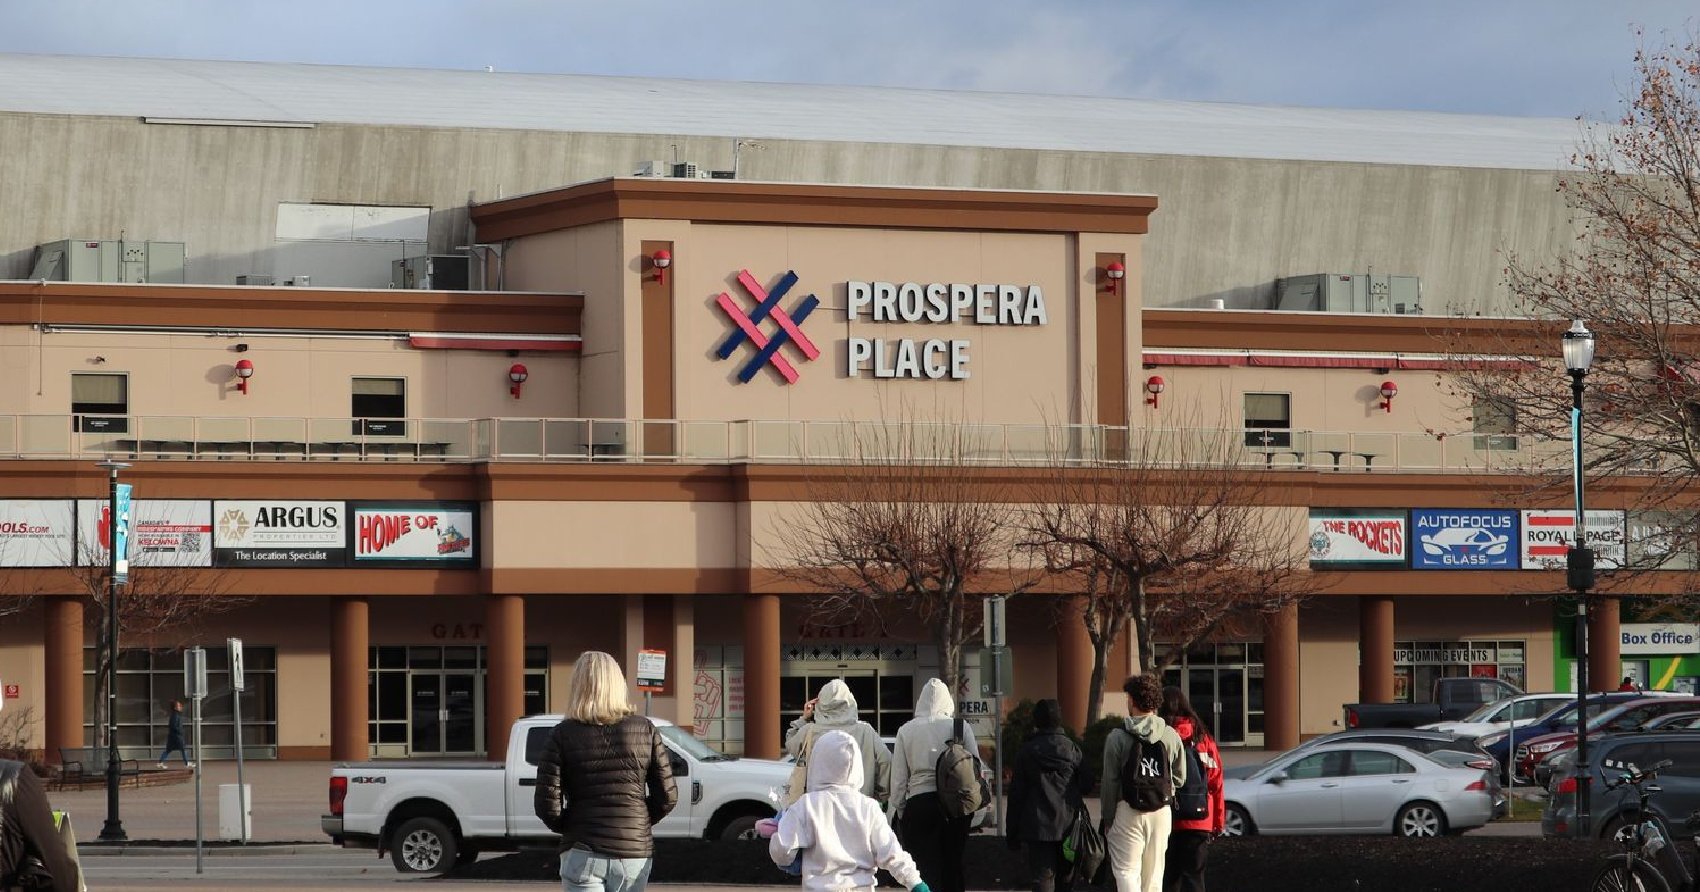 UPDATE: City of Kelowna will find new operator for Prospera Place